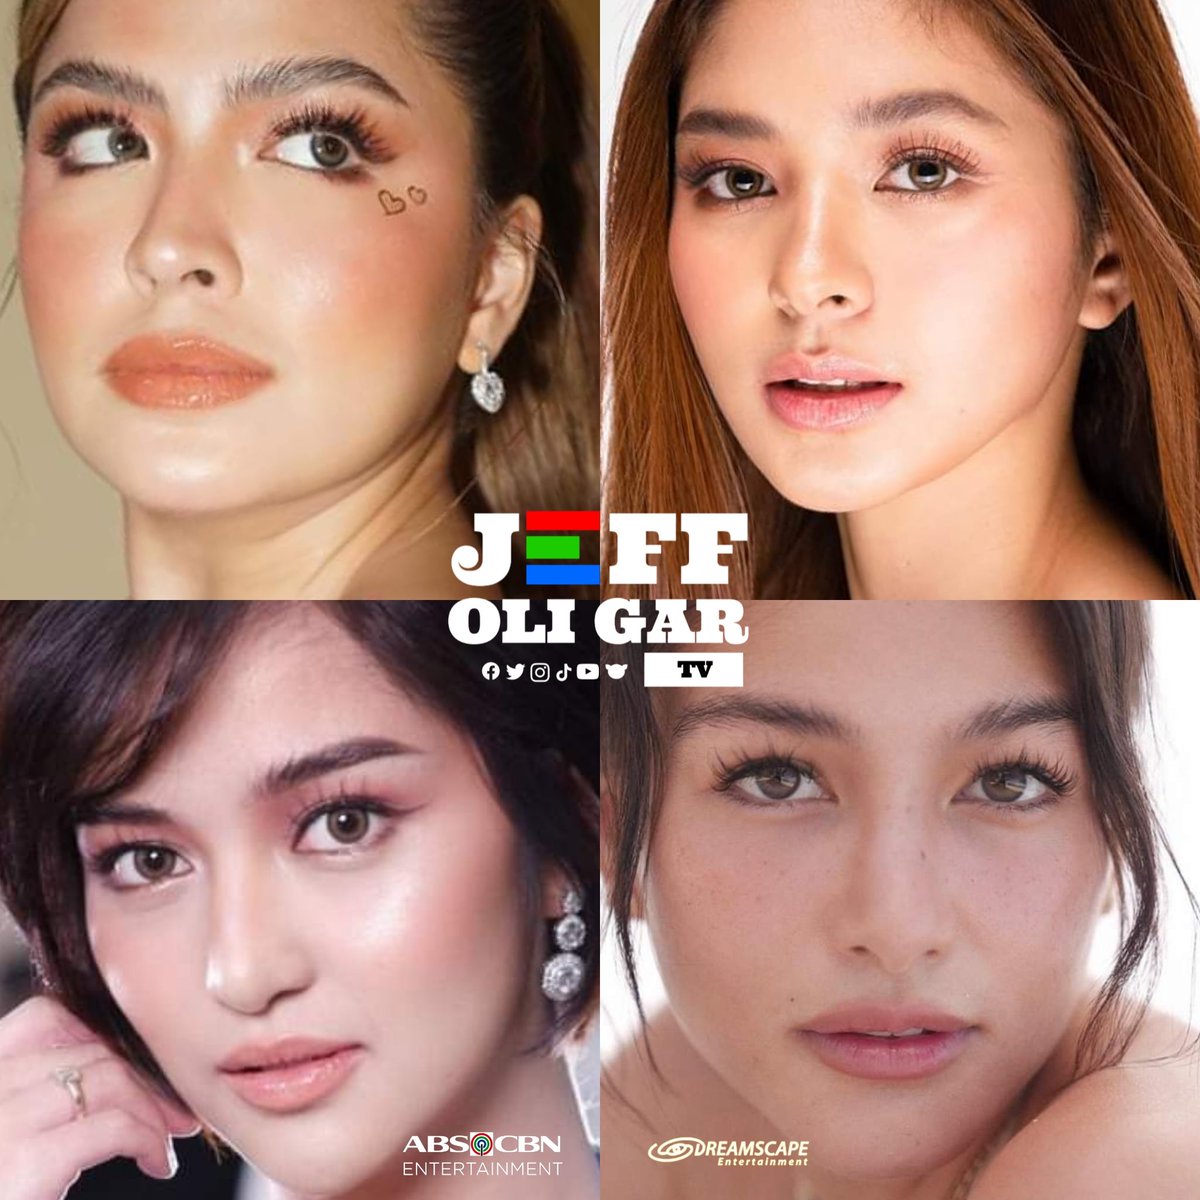 @alexailacad, @iamAndalioLoisa, @charliedizon_ and @ElisseJoson, all in ONE teleserye under @DreamscapePH and of course, @ABSCBN! 

SOON... ✨❤️💚💙